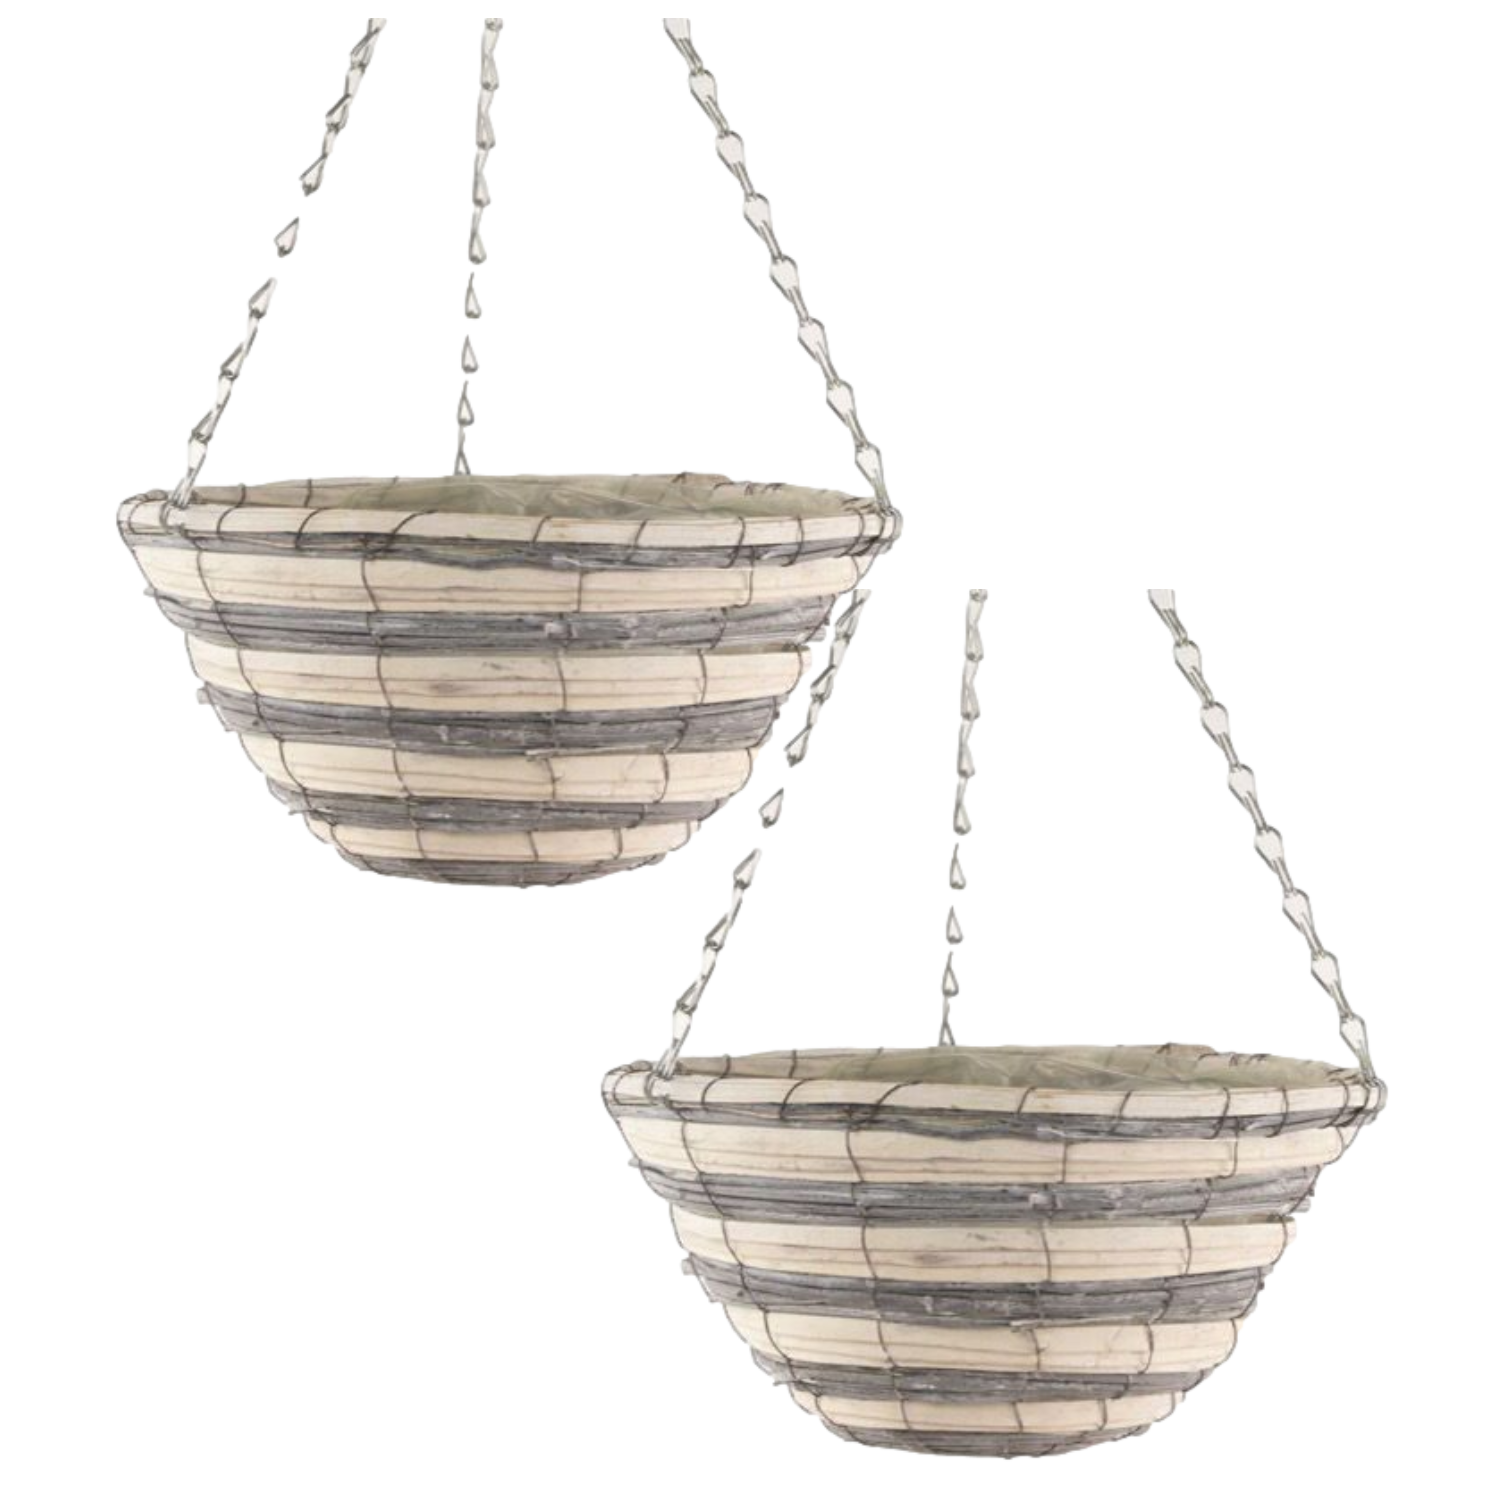 2X30cm 12Inch Natural Grey Cream Wicker Hanging Deco Basket Lined Willow Planter